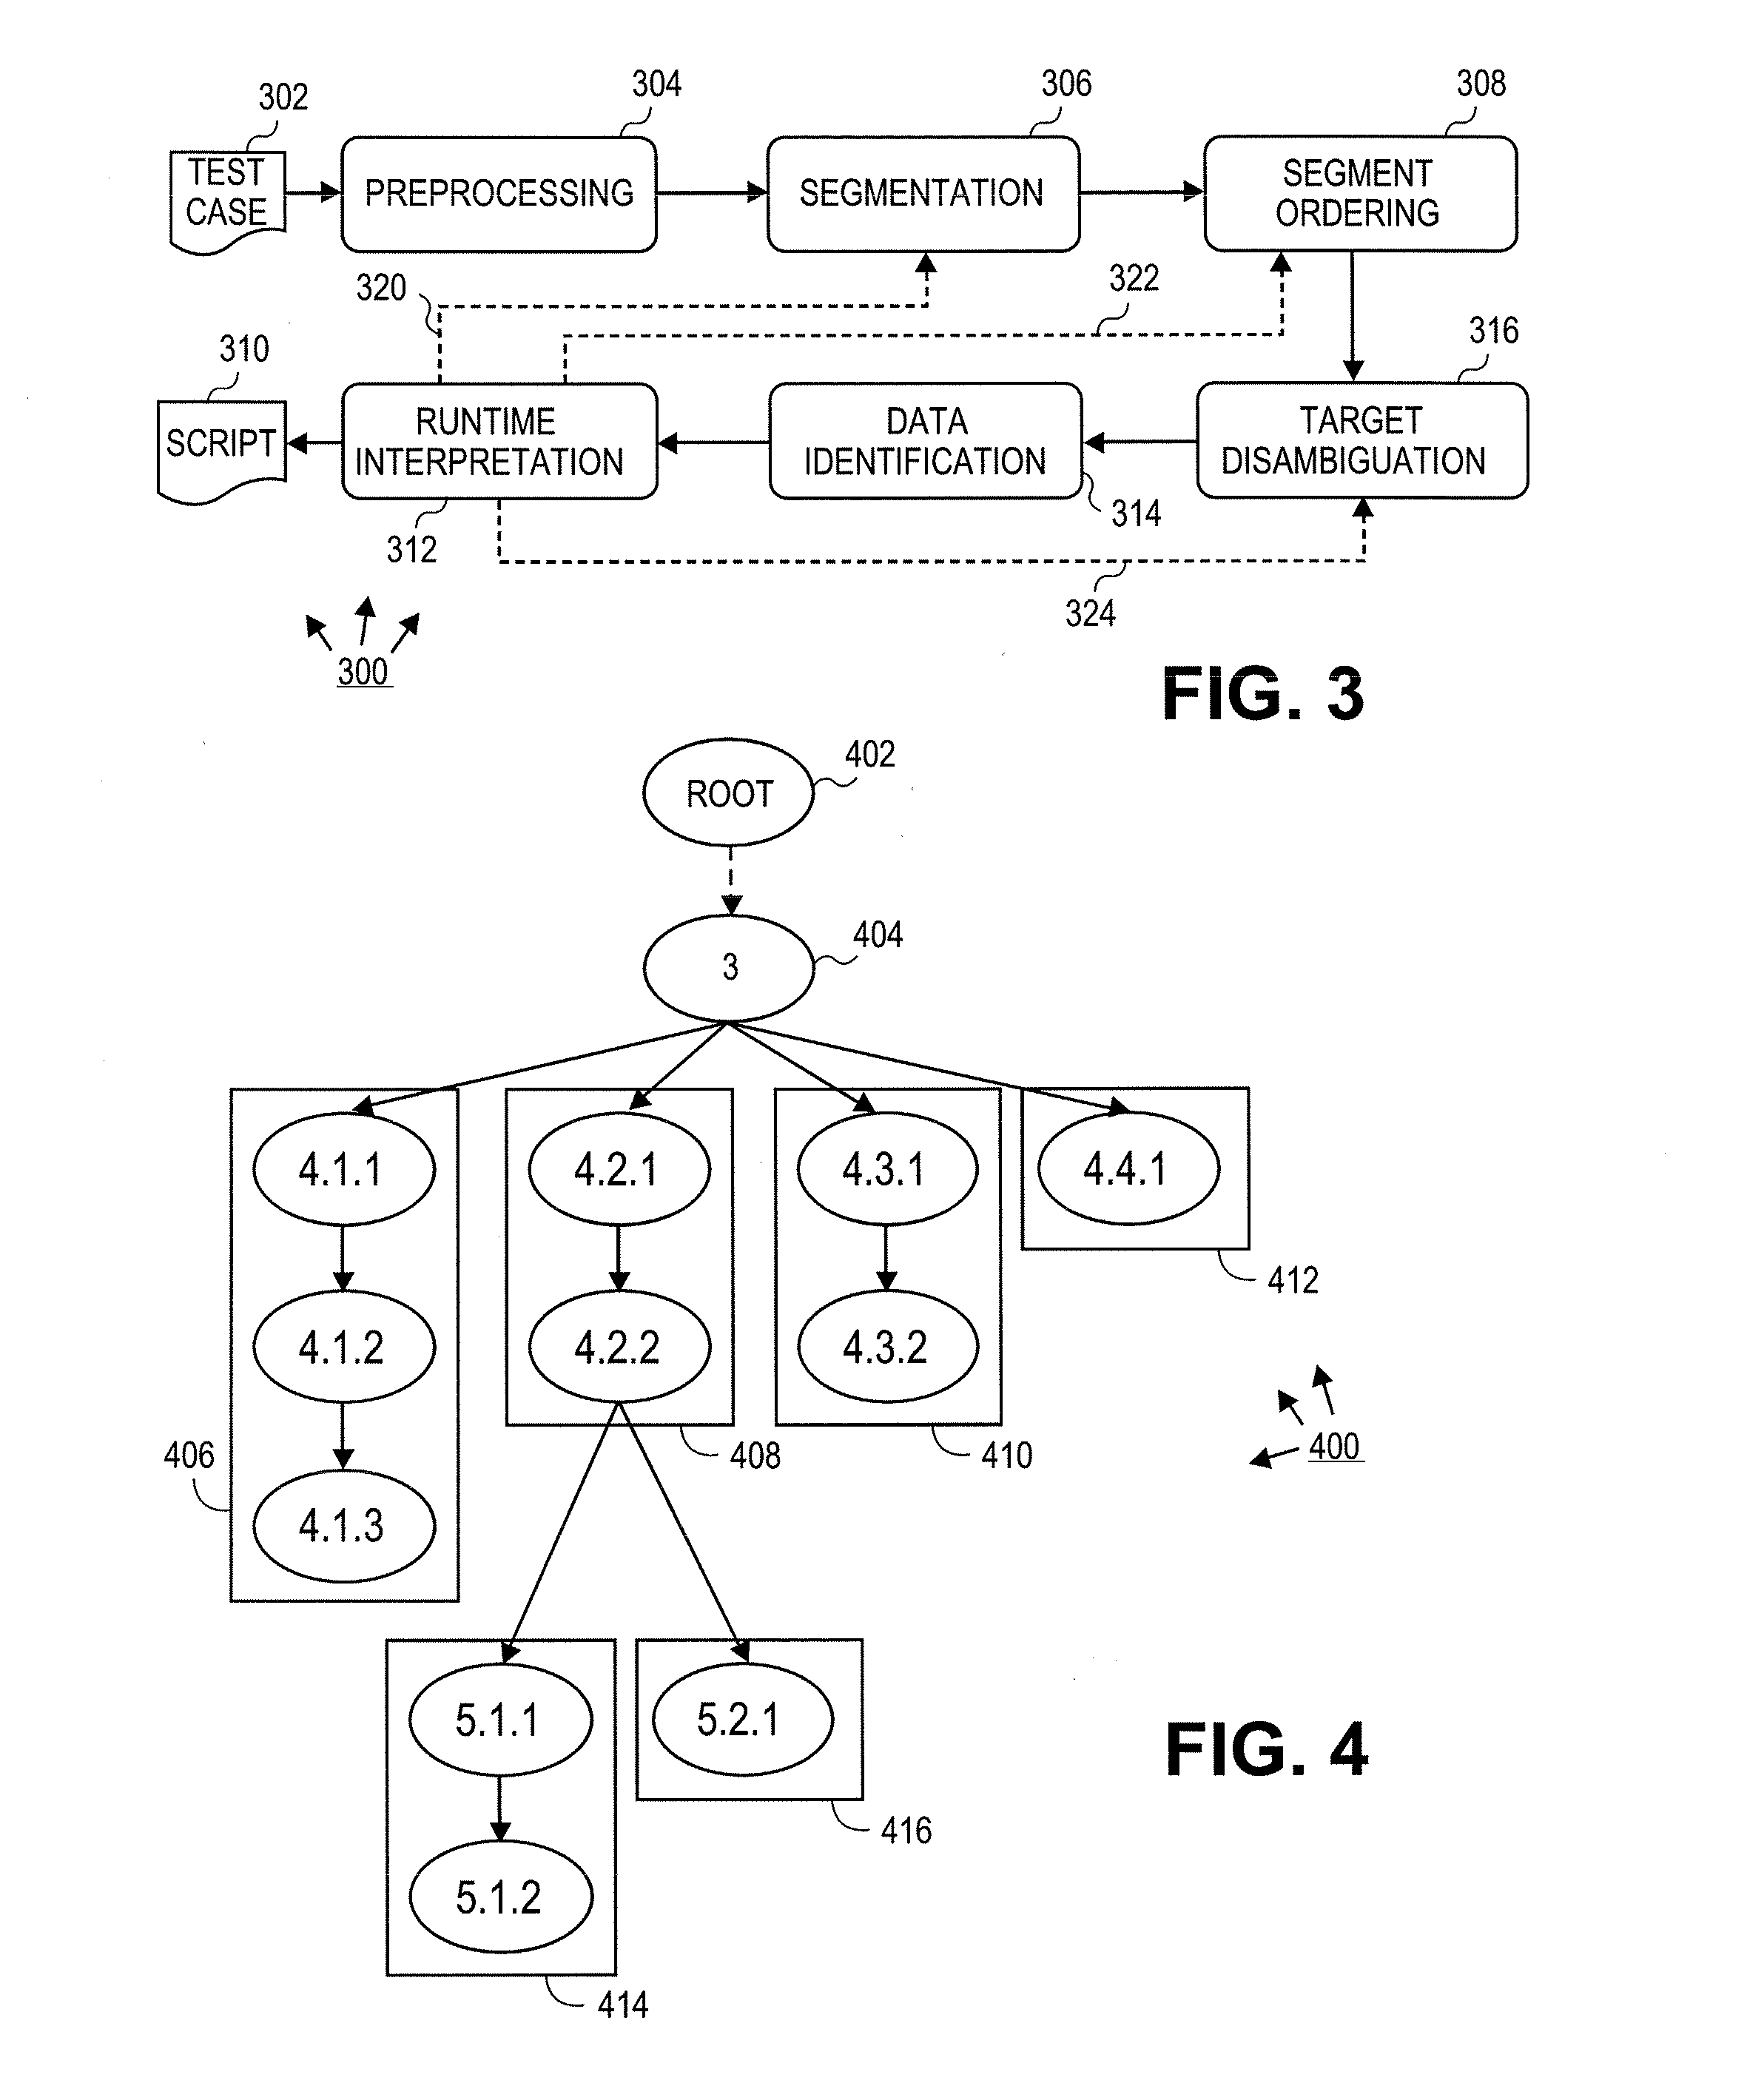 System and Method For Automating Test Automation